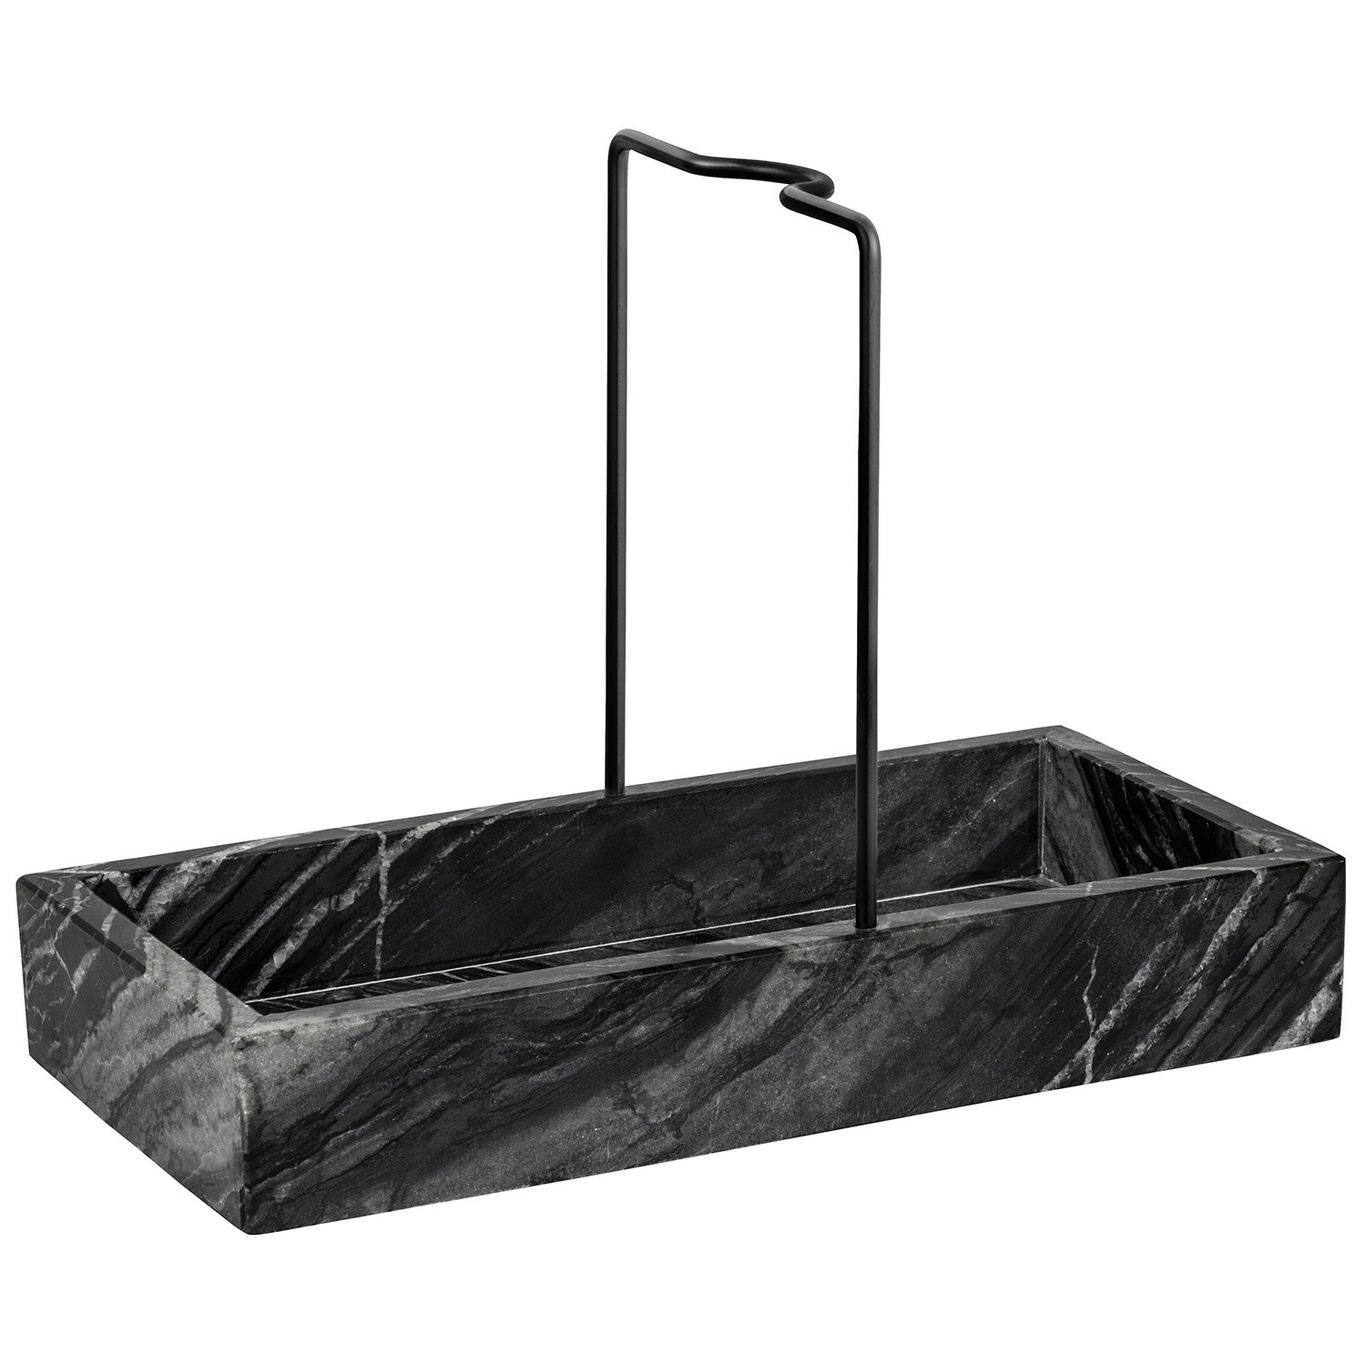 MARBLE Tray For Dish Soap, Black